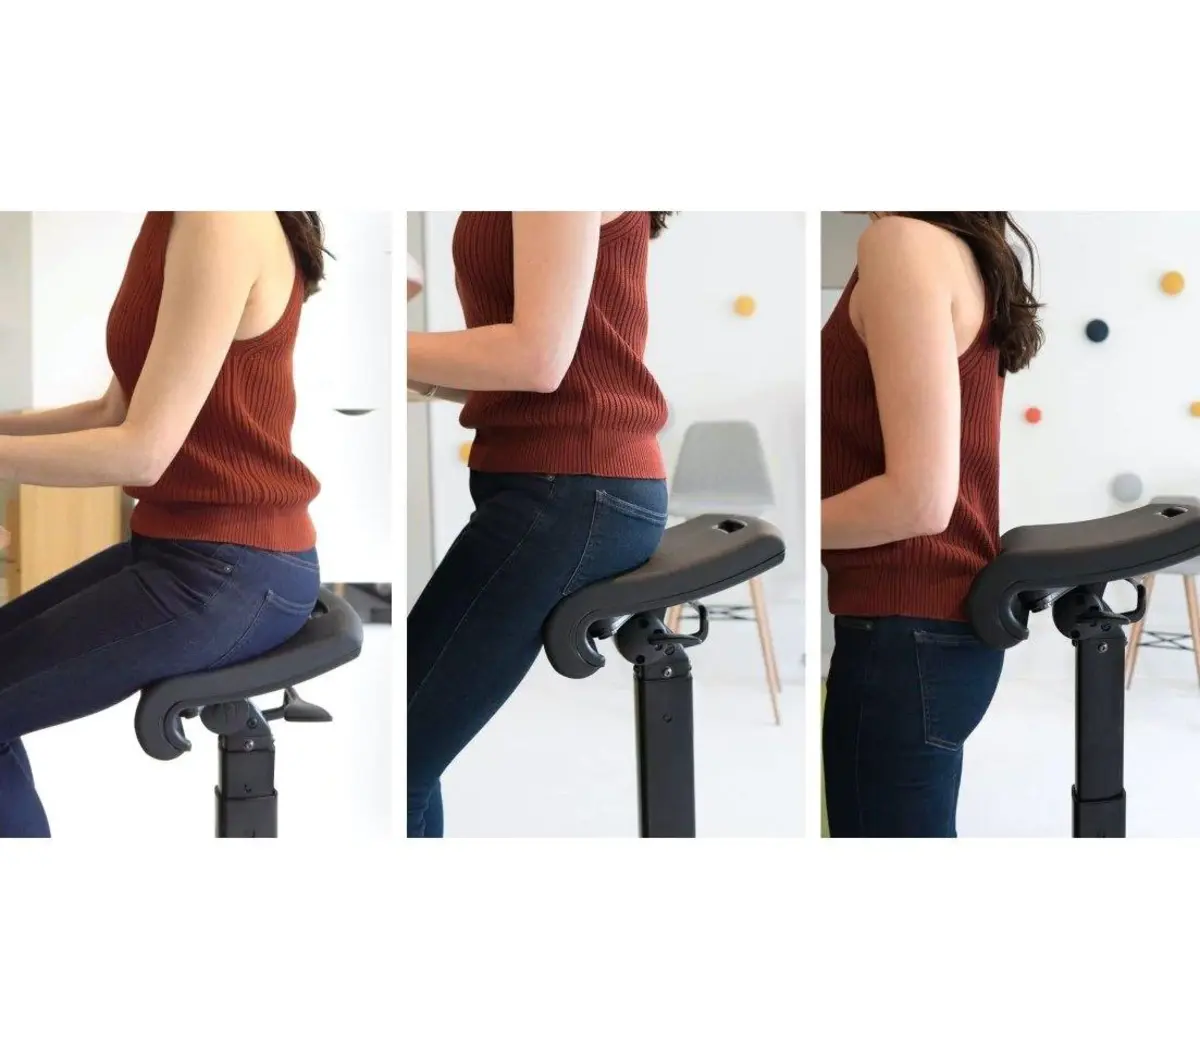 Ergo Impact's LeanRite Elite Review: Standing Chair For Better Posture And  Better Results - Men's Journal Tech Trends: Stay Ahead with Tech News,  Rumors & Deals